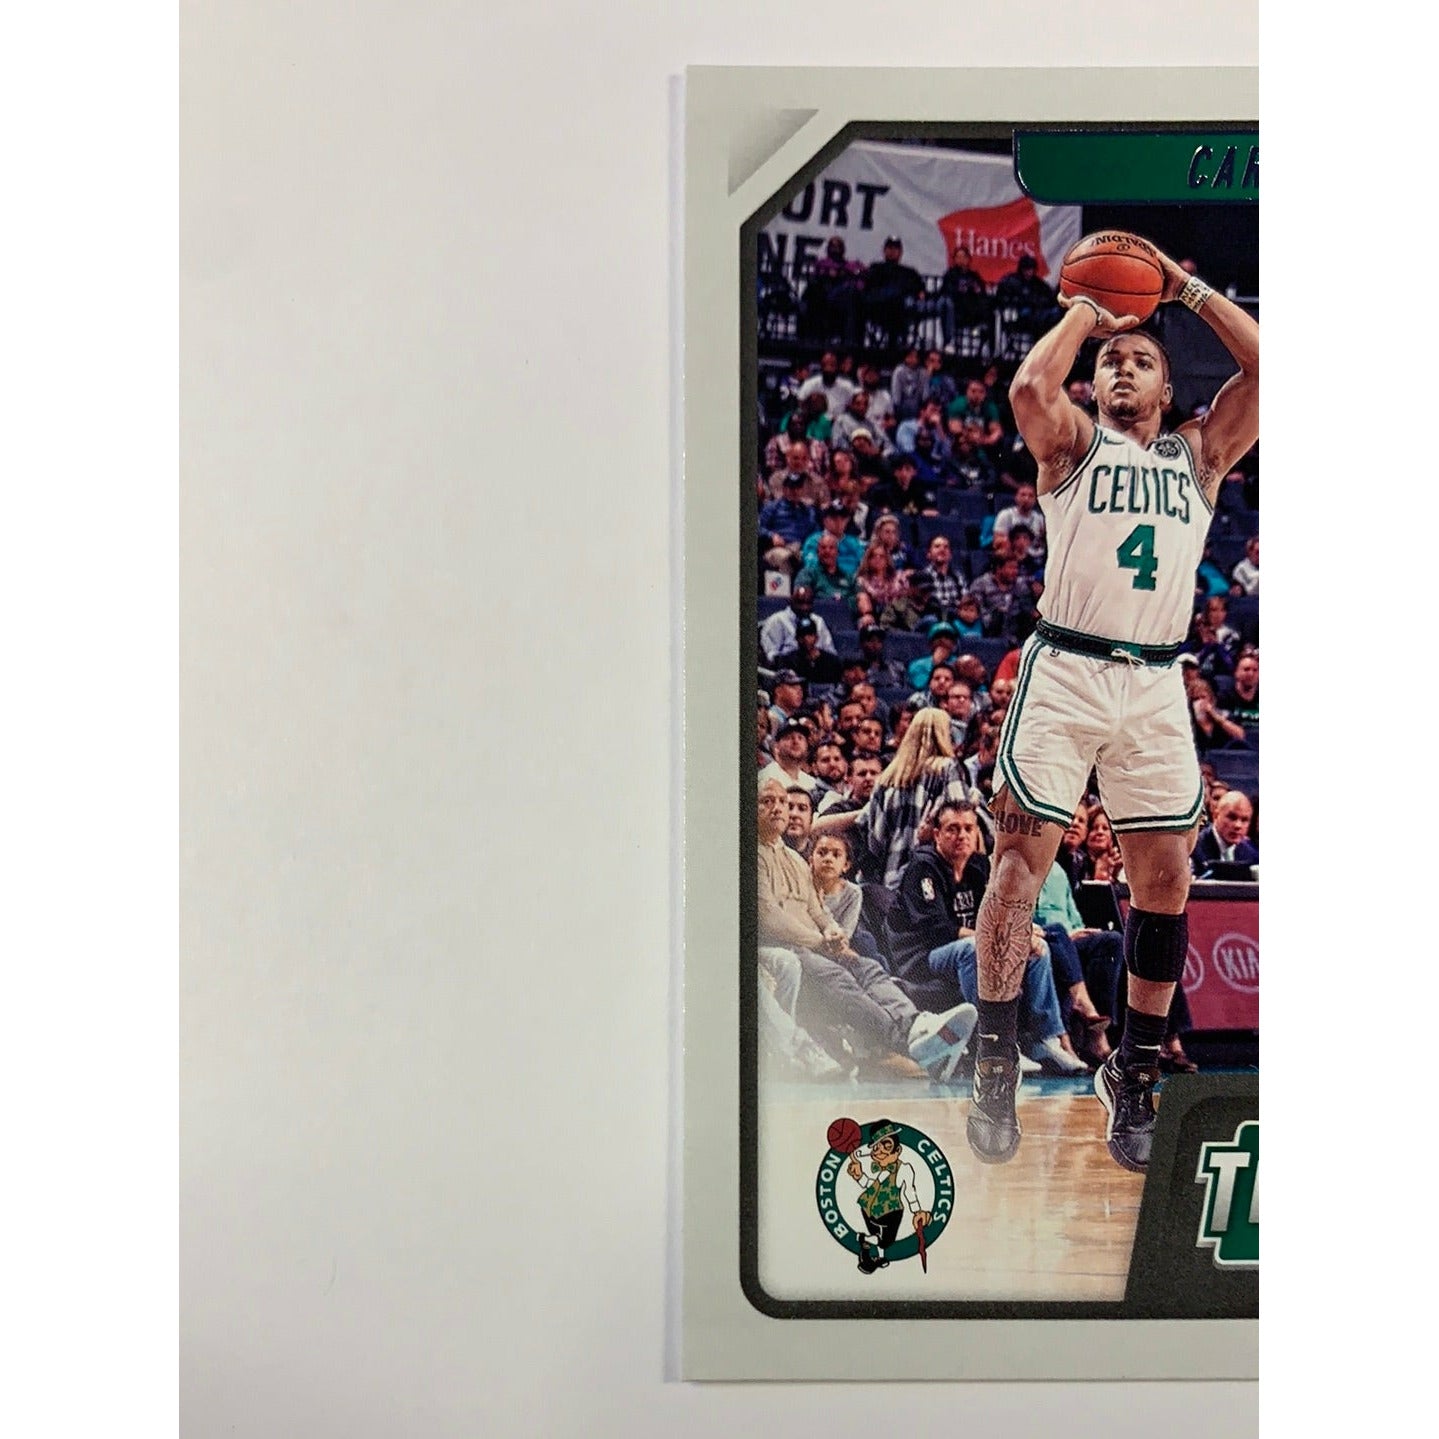 2019-20 Chronicles Threads Carsen Edwards Rookie Card